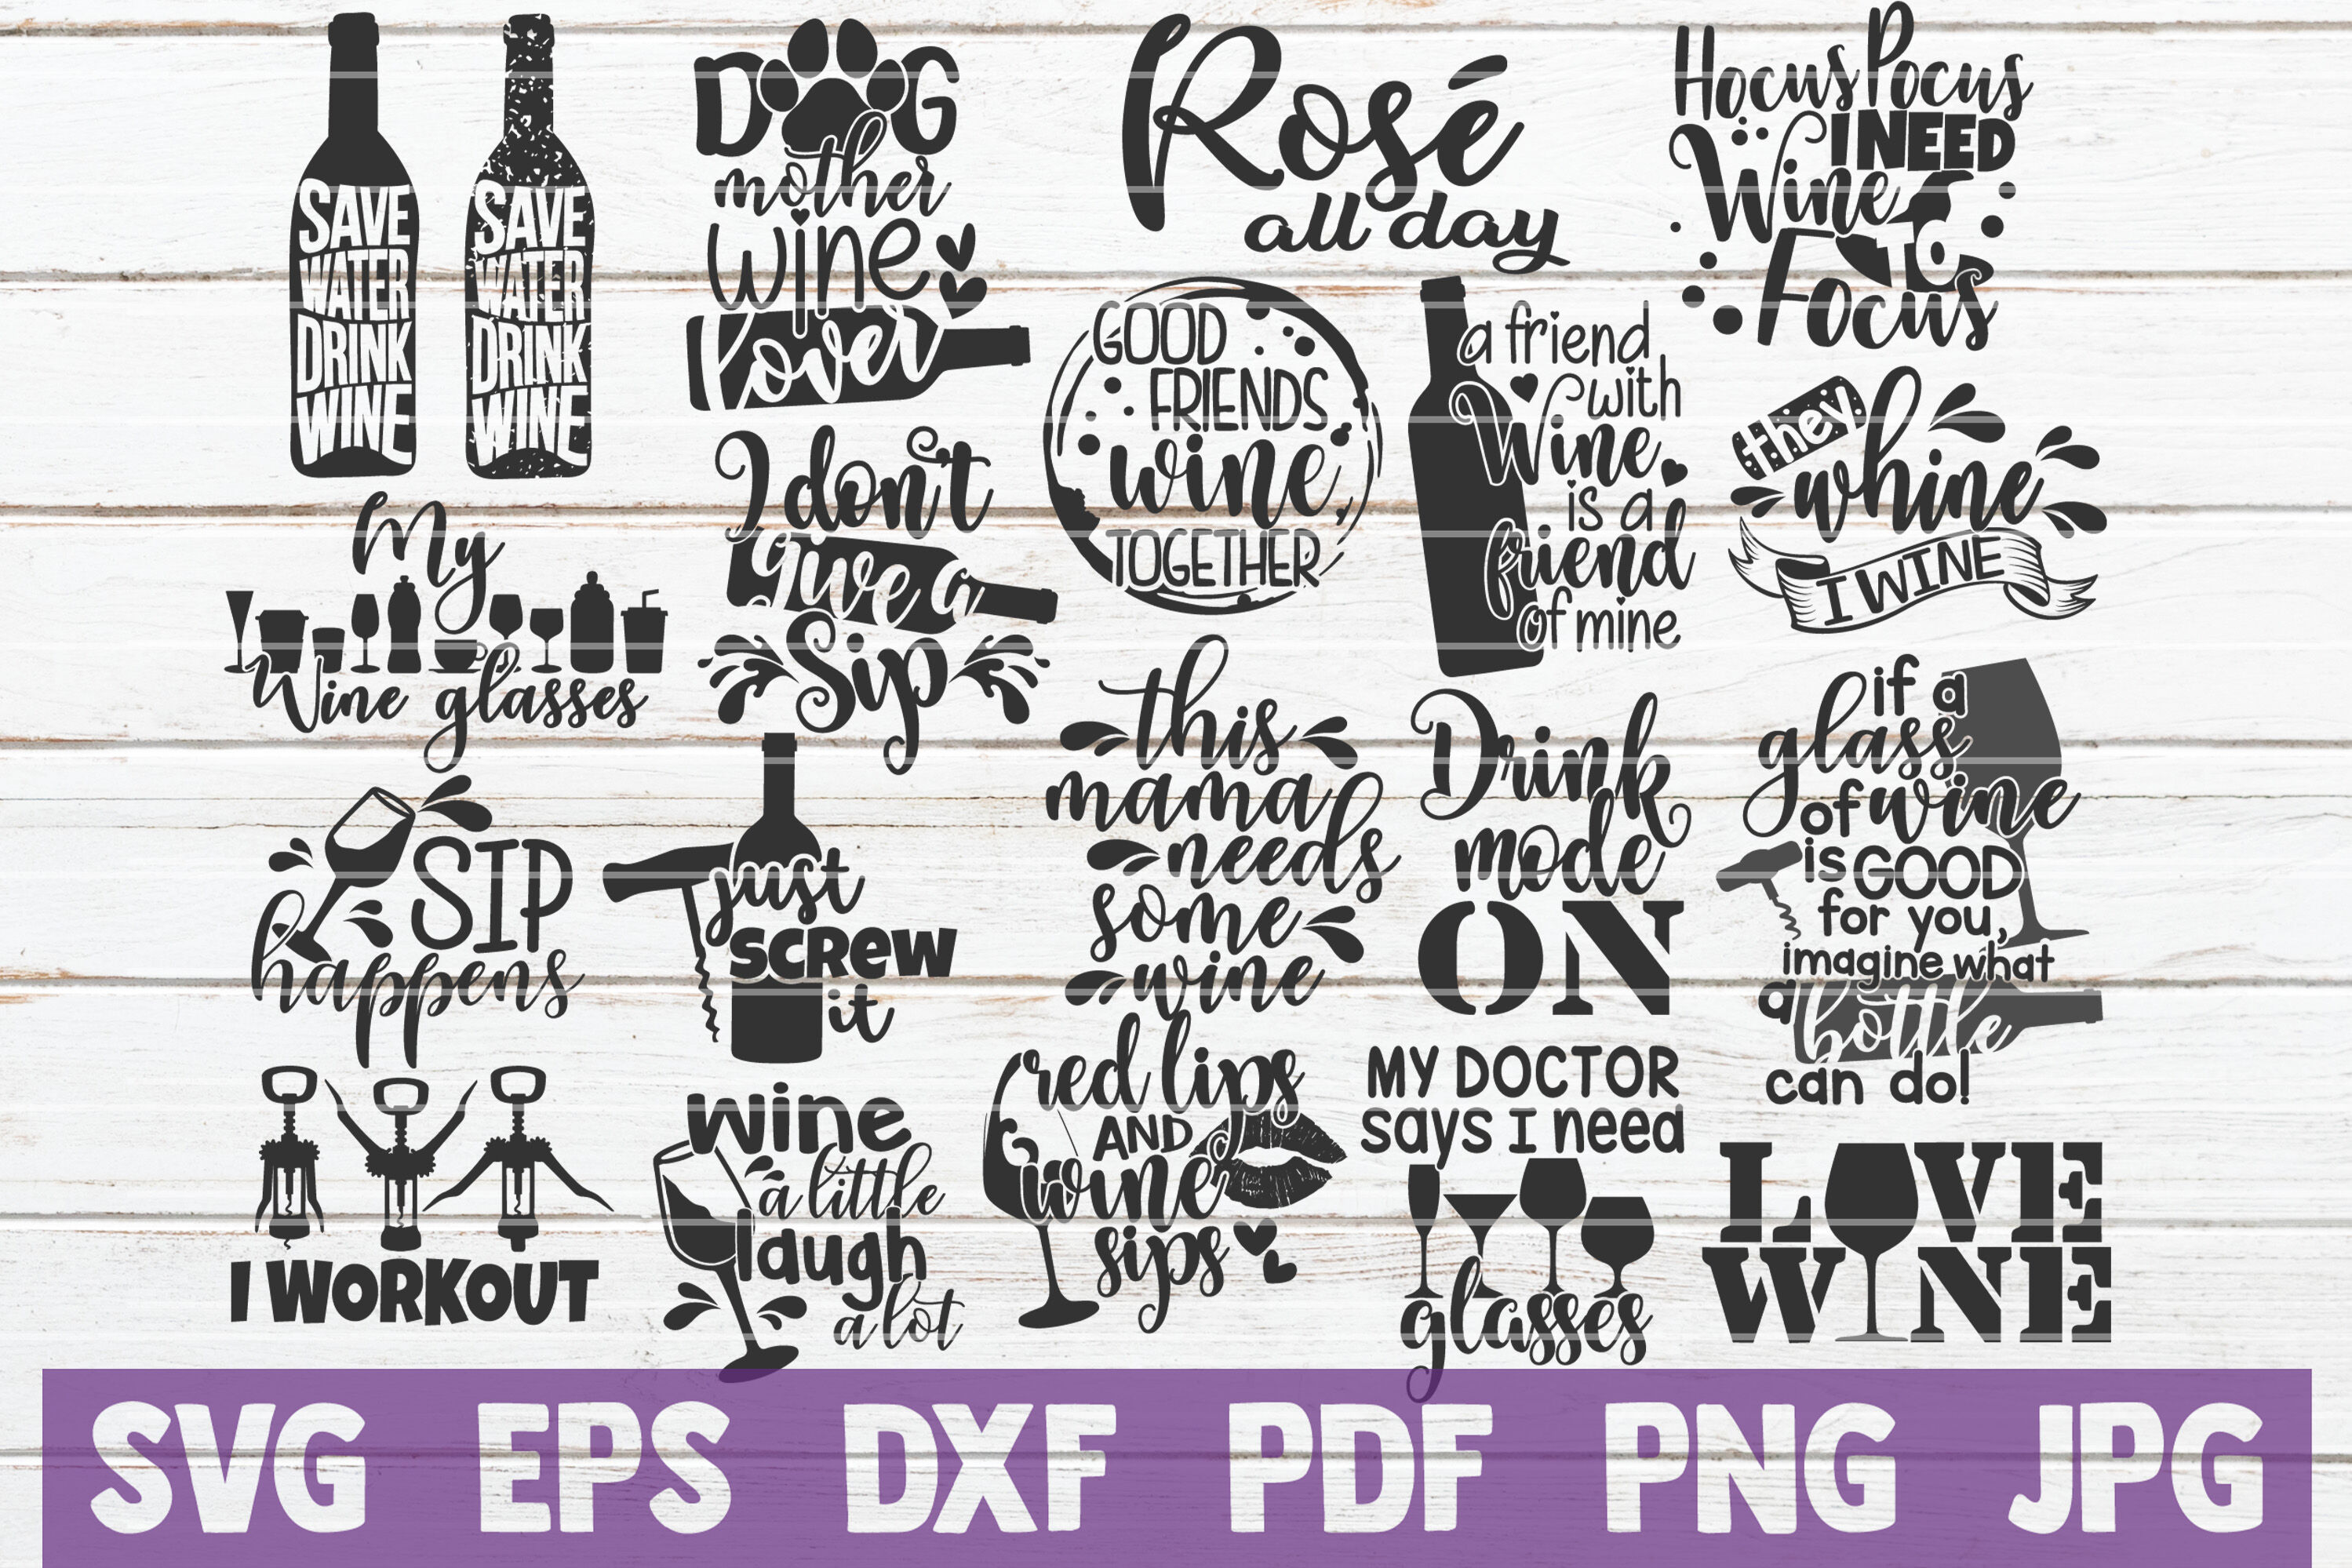 Wine Lover - Wine SVG and Cut Files for Crafters